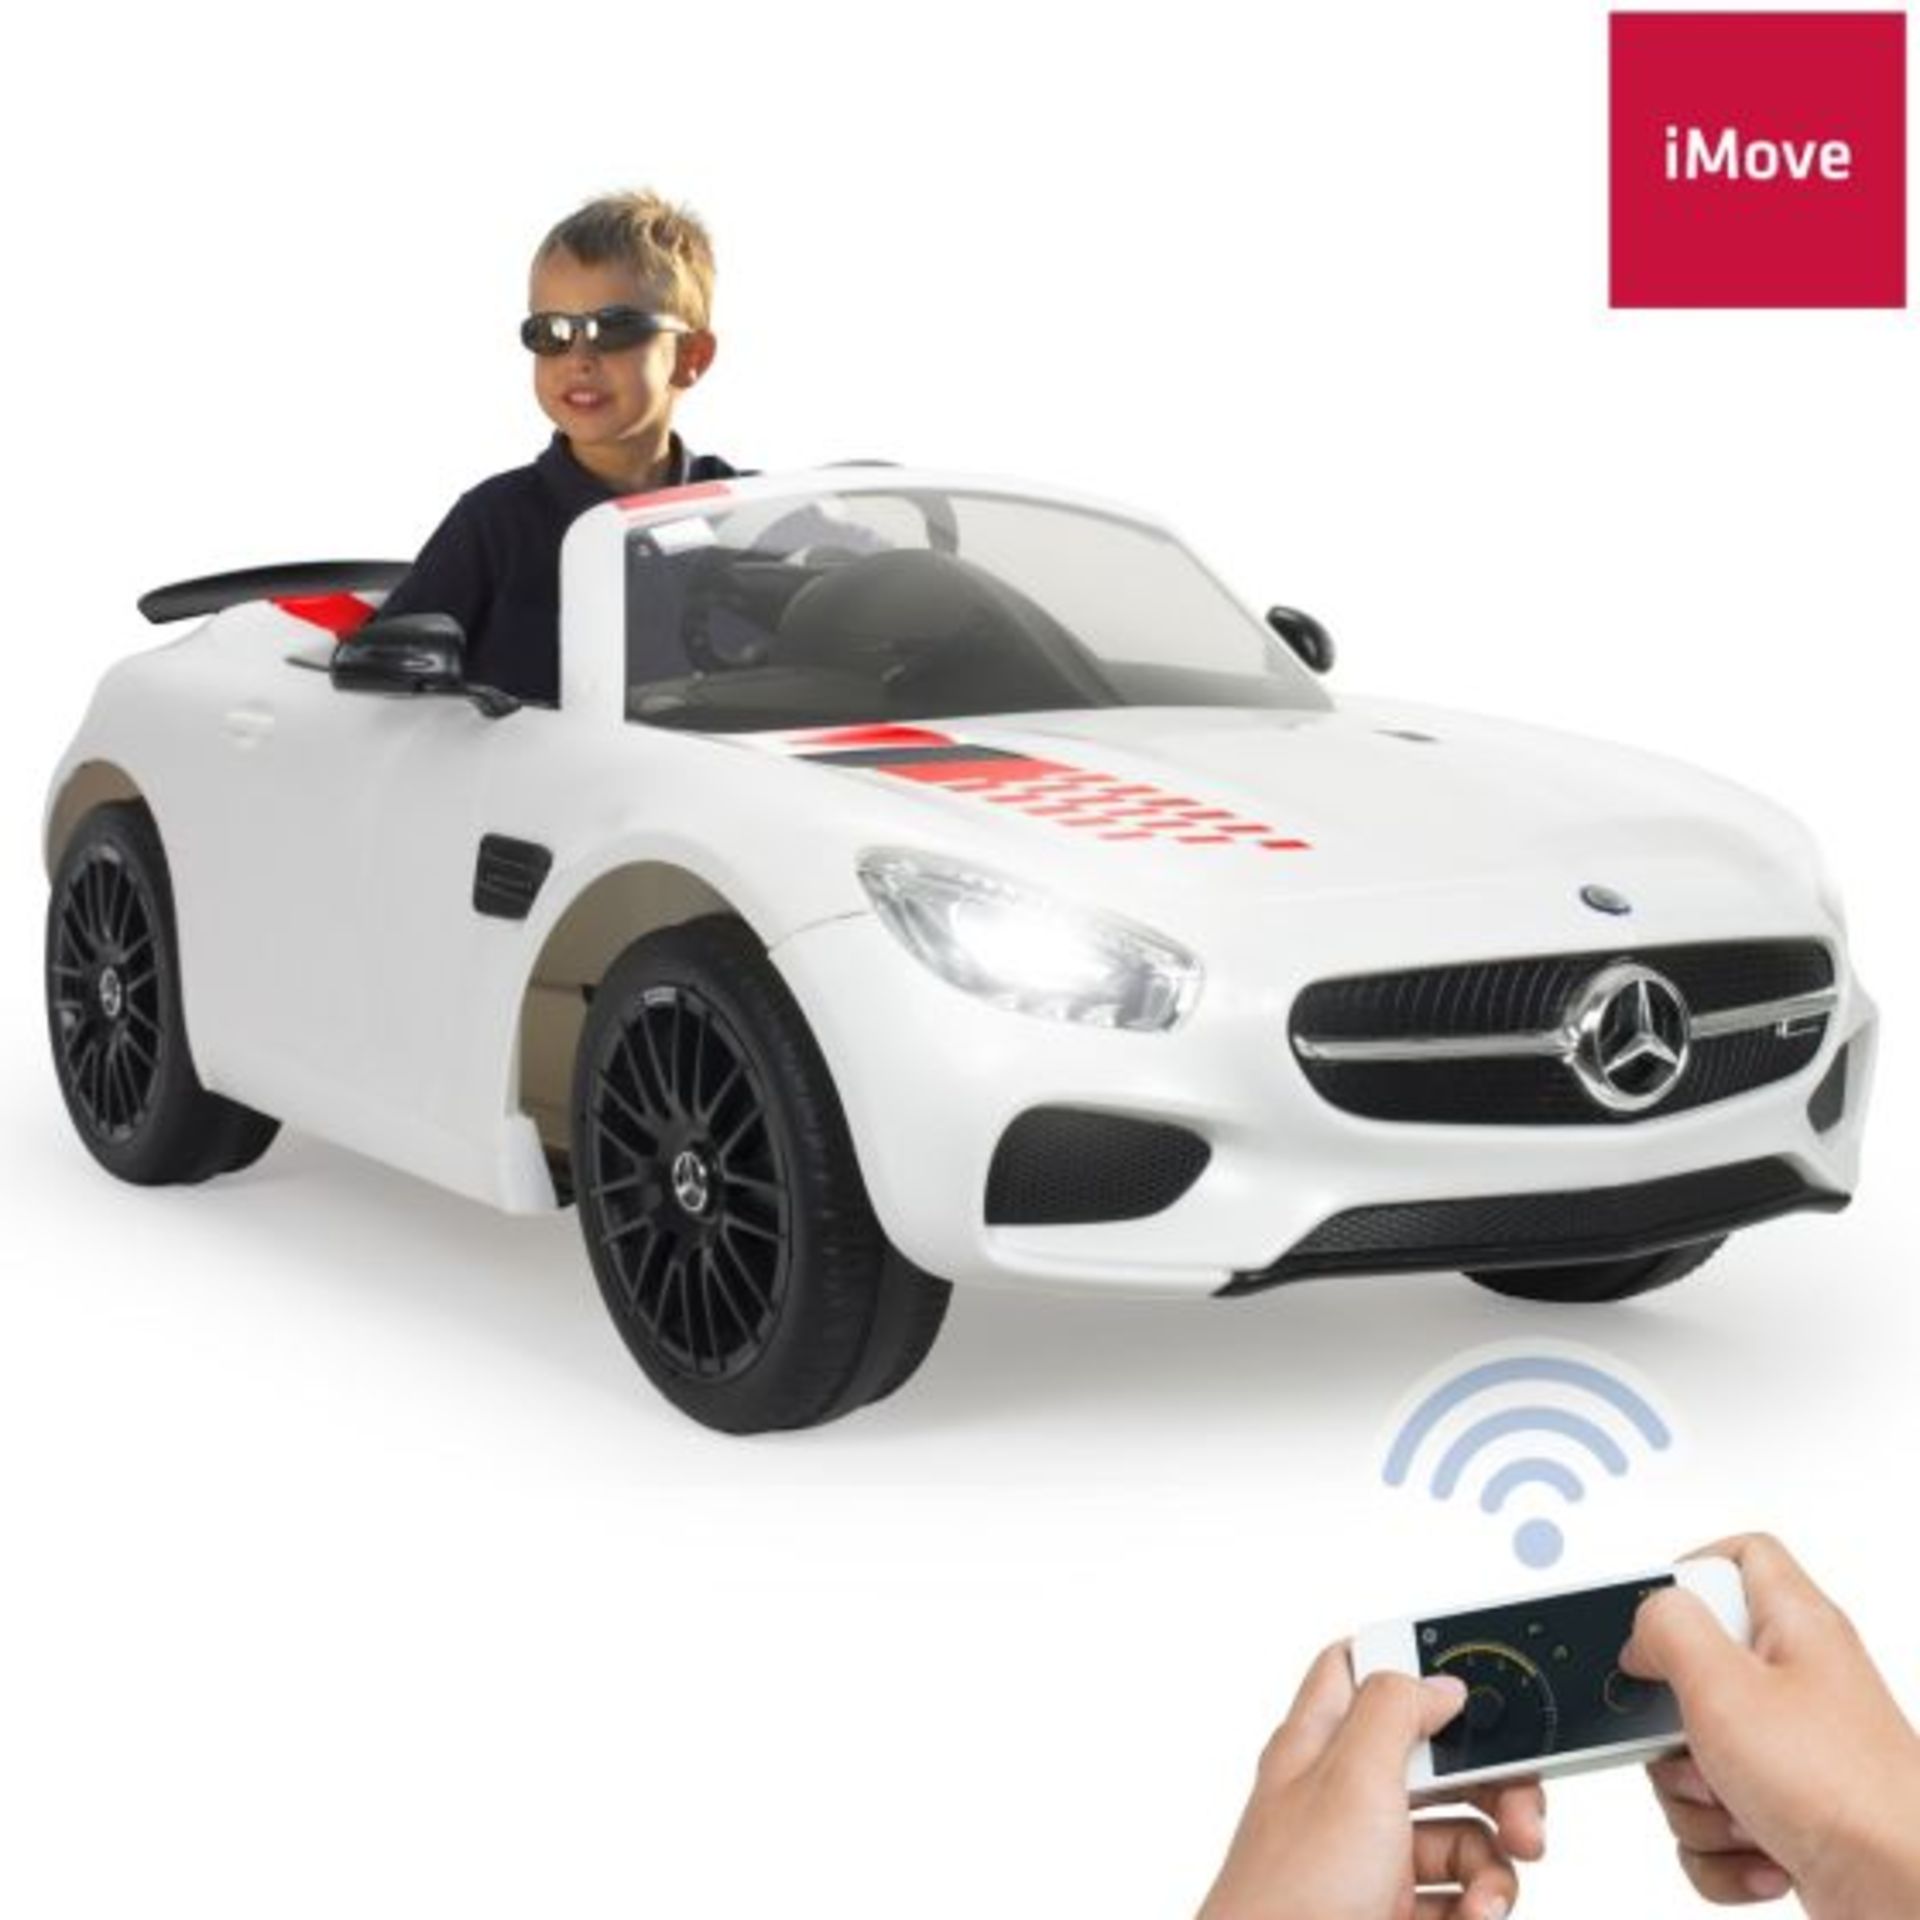 NEW BOXED INJUSA – Mercedes Benz GT-S 12 V Car with Remote Control and Gear Shift. White. The